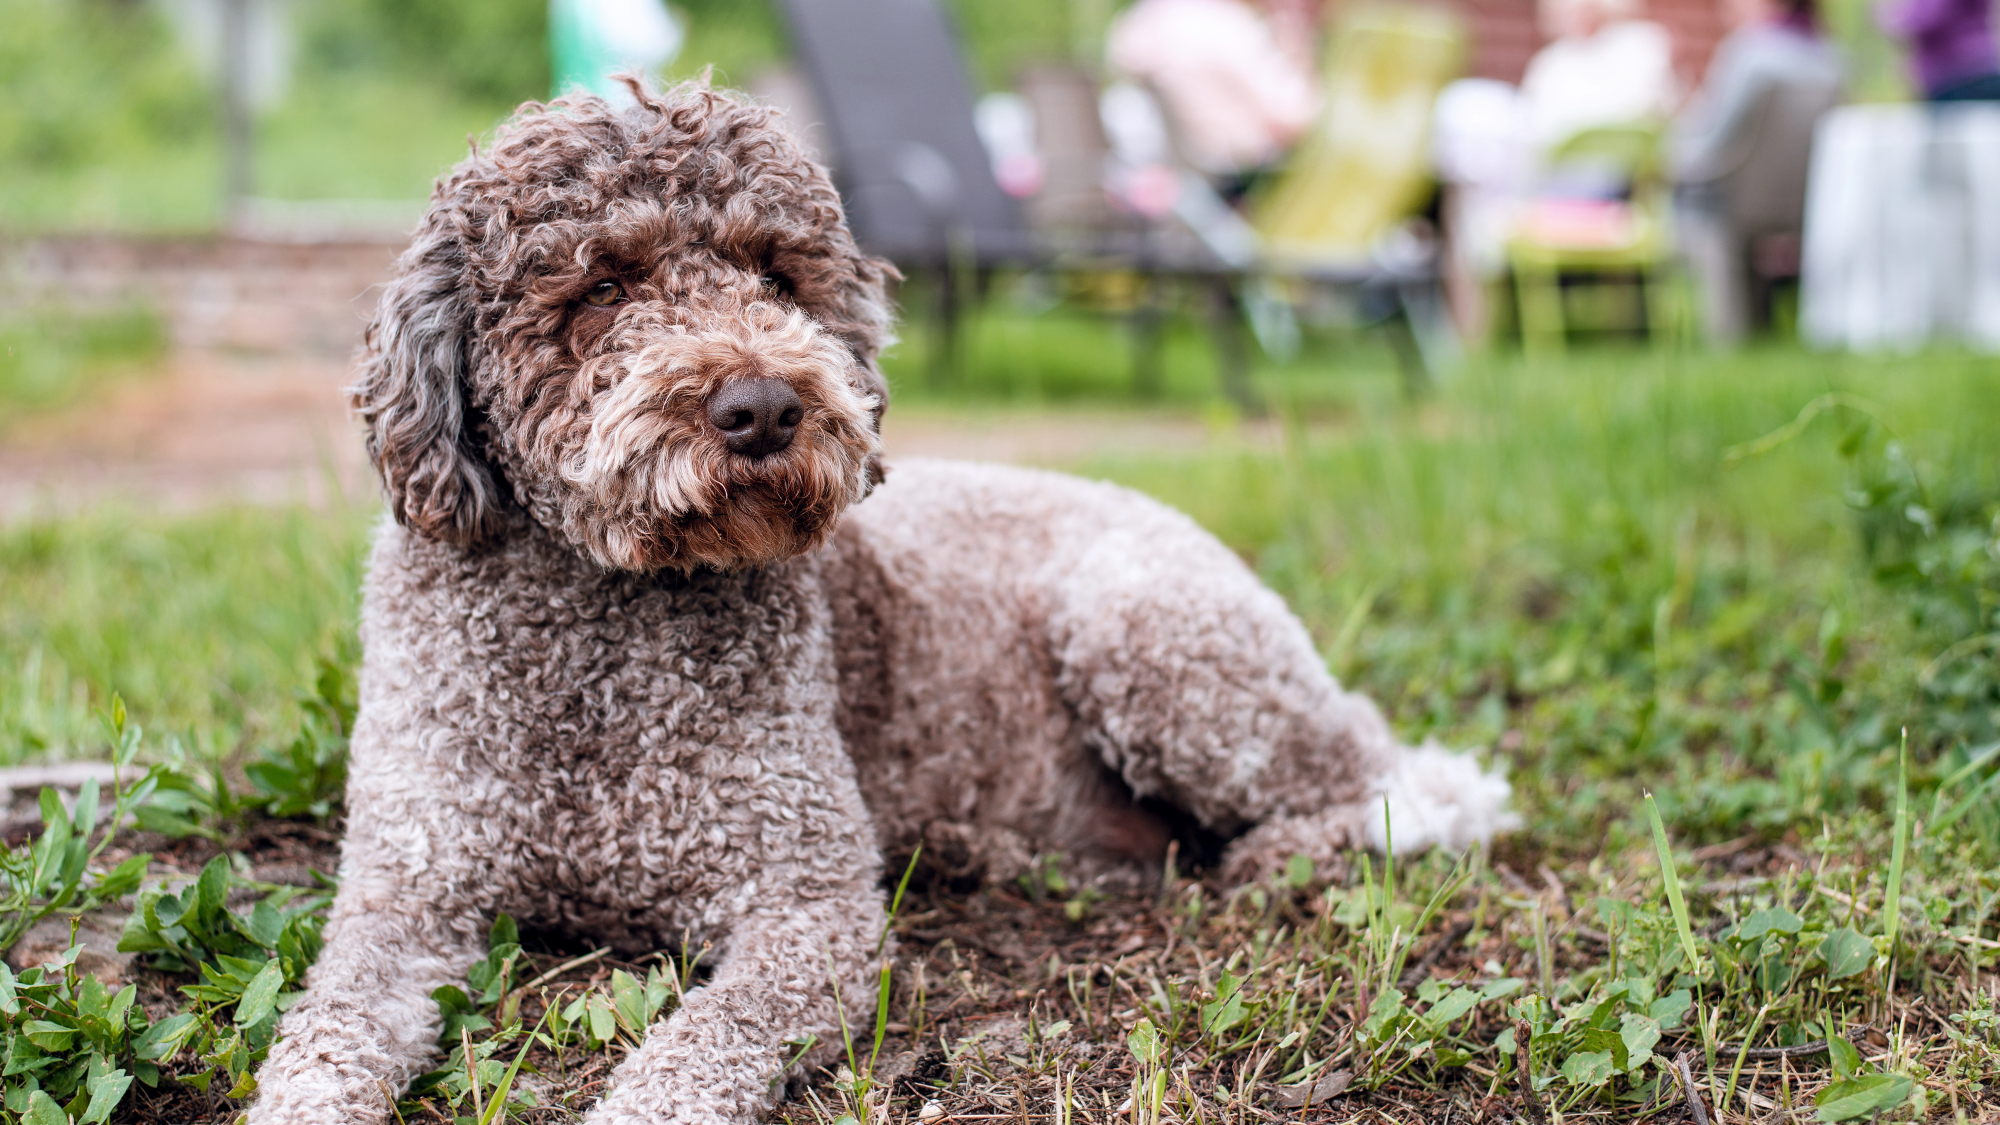 Brown Lagotto Romagnolo lying on grass